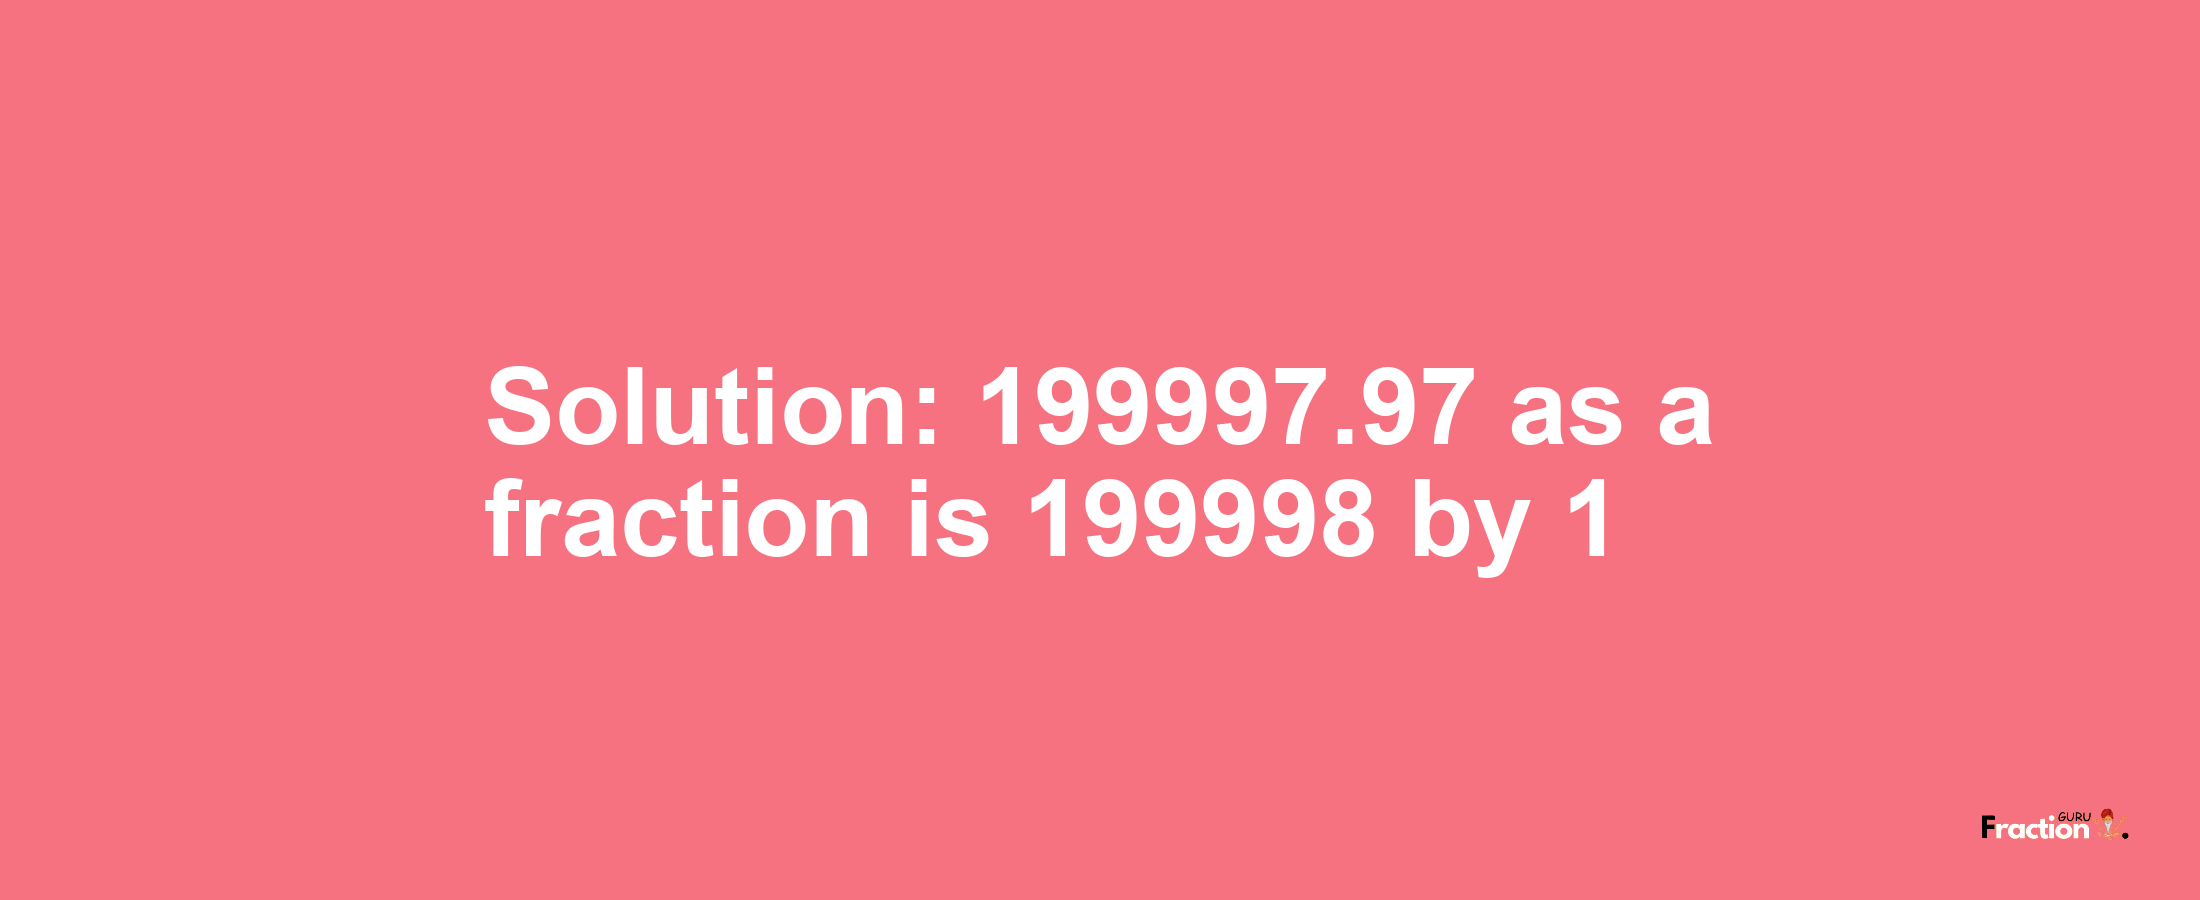 Solution:199997.97 as a fraction is 199998/1